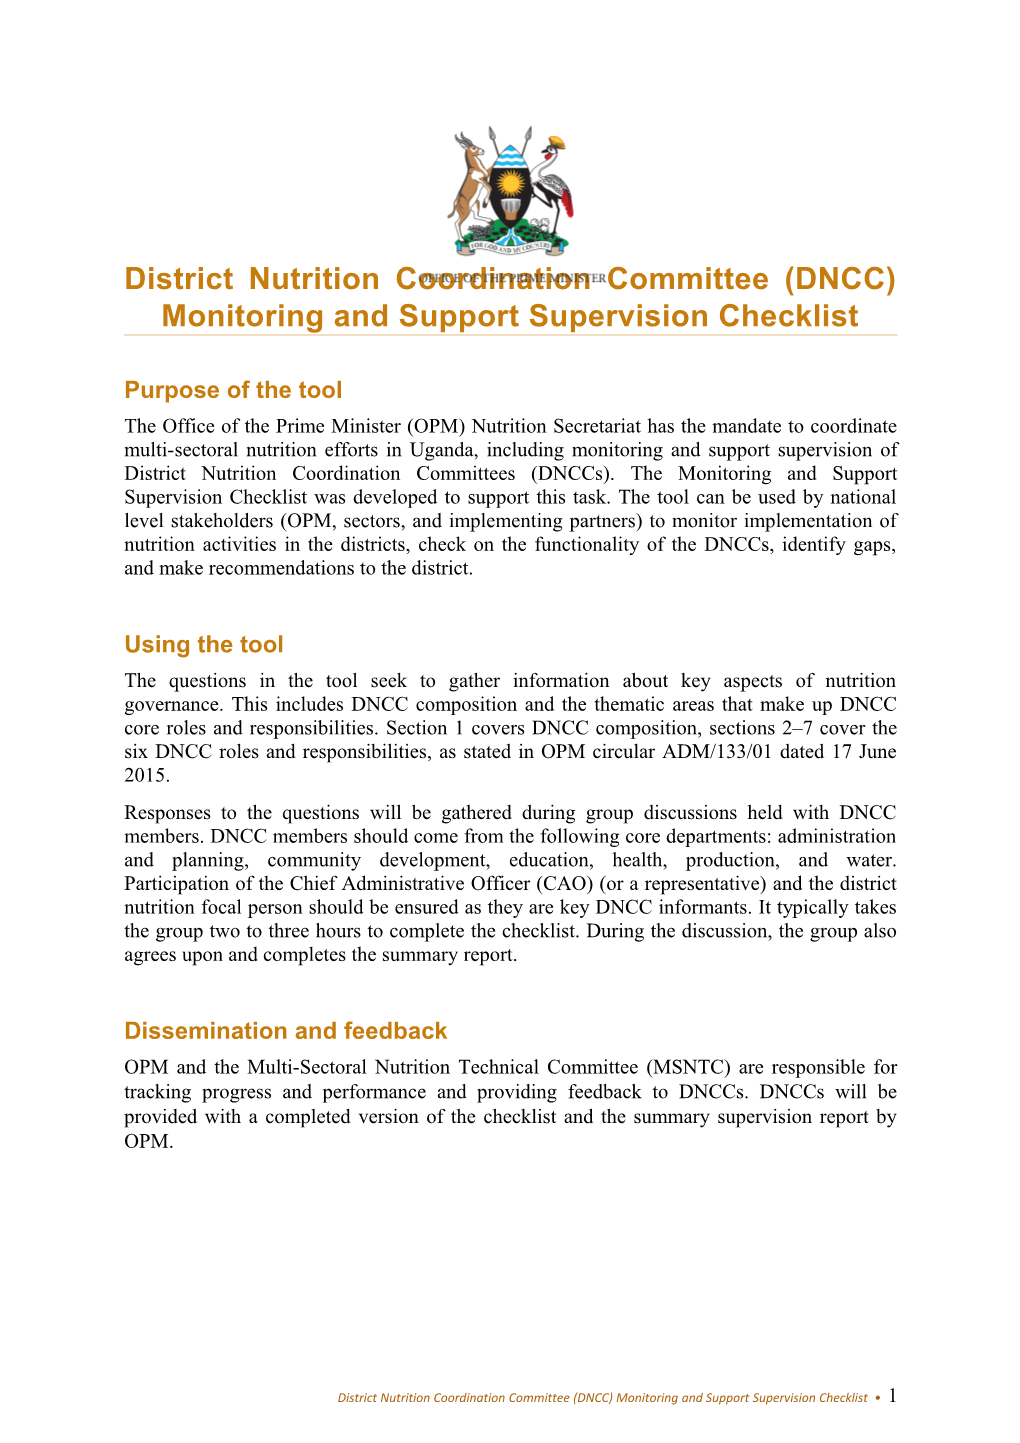 Uganda District Nutrition Coordination Committee (DNCC) Monitoring and Support Supervision